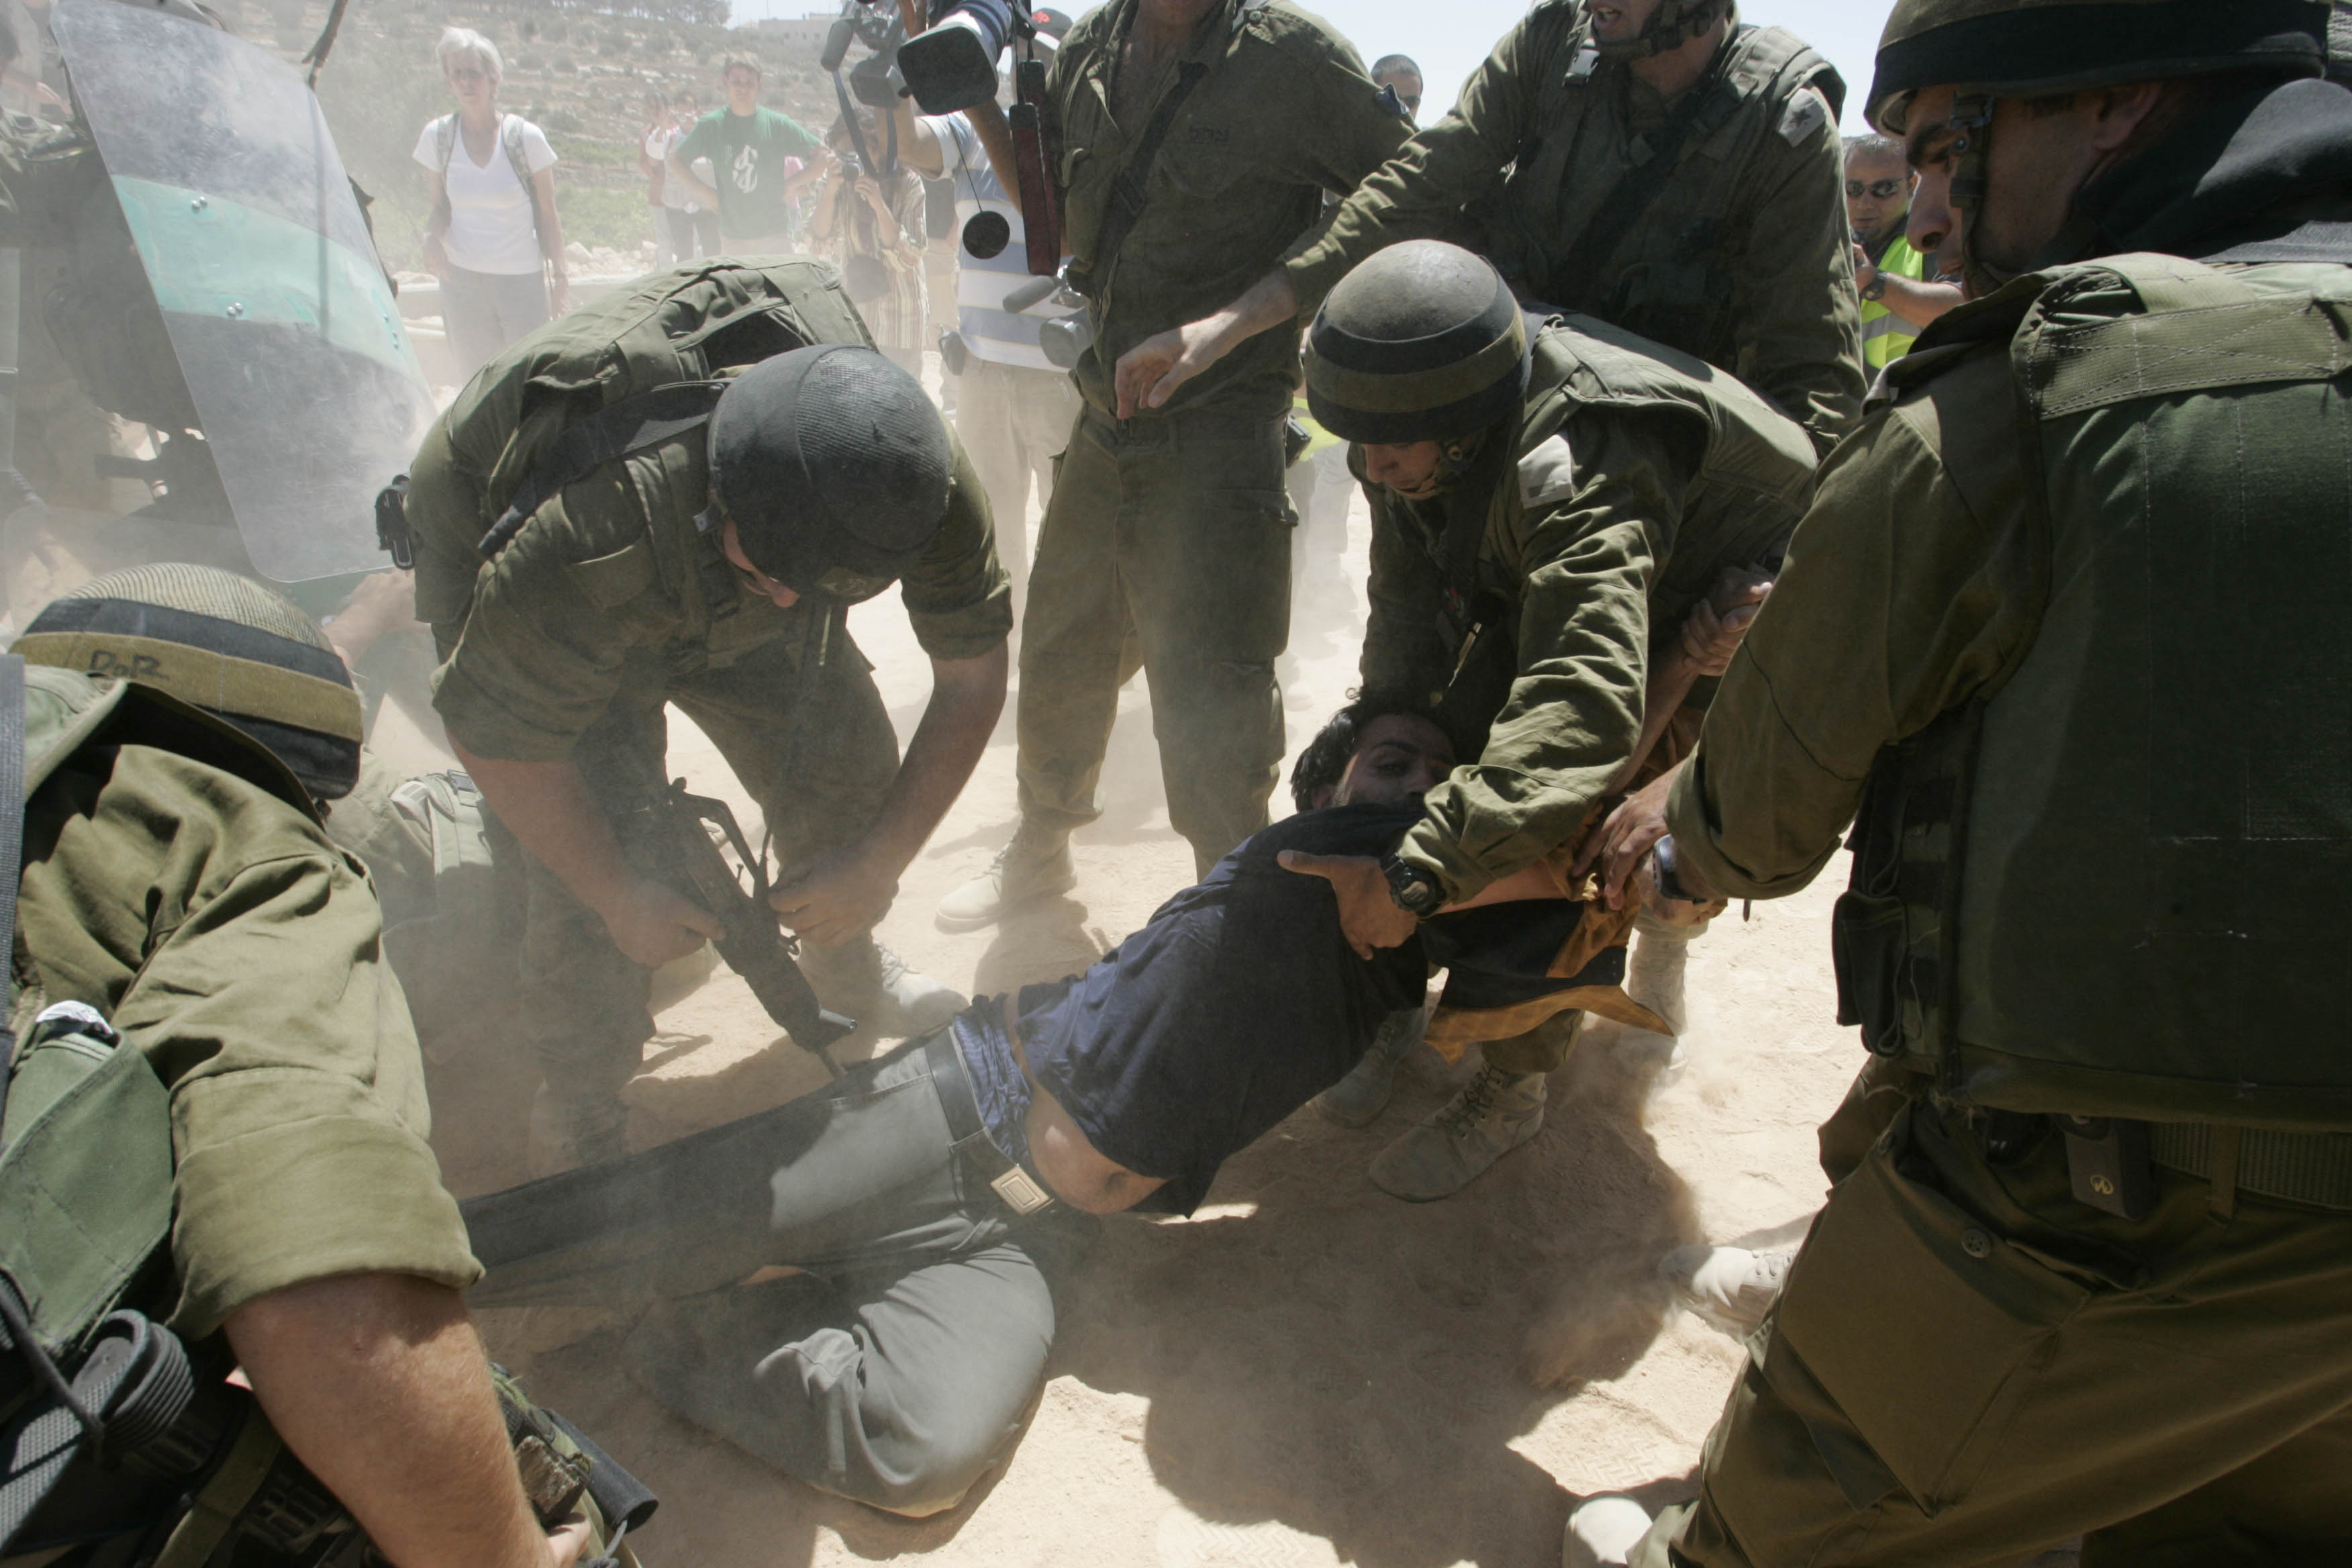 UMM SALAMUNA : Palestinian, Israeli and foreign peace activists are pushed back by israeli soldiers as they protest against the building of the controversial Israeli separation barrier in the West Bank village of Umm Salamuna south of the West Bank city of Bethlehem 13 July 2007. The barrier is a combination of concrete walls and wire fences running more than 650 kilometres (400 miles) north to south that Israel says is necessary to protect it self from Palestinian militants. However, large sections of it encroach on the West Bank, and the Palestinians call it a land grab. The International Court of Justice issued a non-binding ruling in 2004 that parts of the barrier in the West Bank are illegal and should be removed. The barrier is supposed to follow the Green Line that marks Israel's borders before the 1967 Six Day War, when the Jewish state captured the Golan Heights, east Jerusalem, the Gaza Strip and the West Bank, AFP PHOTO MUSA AL-SHAER